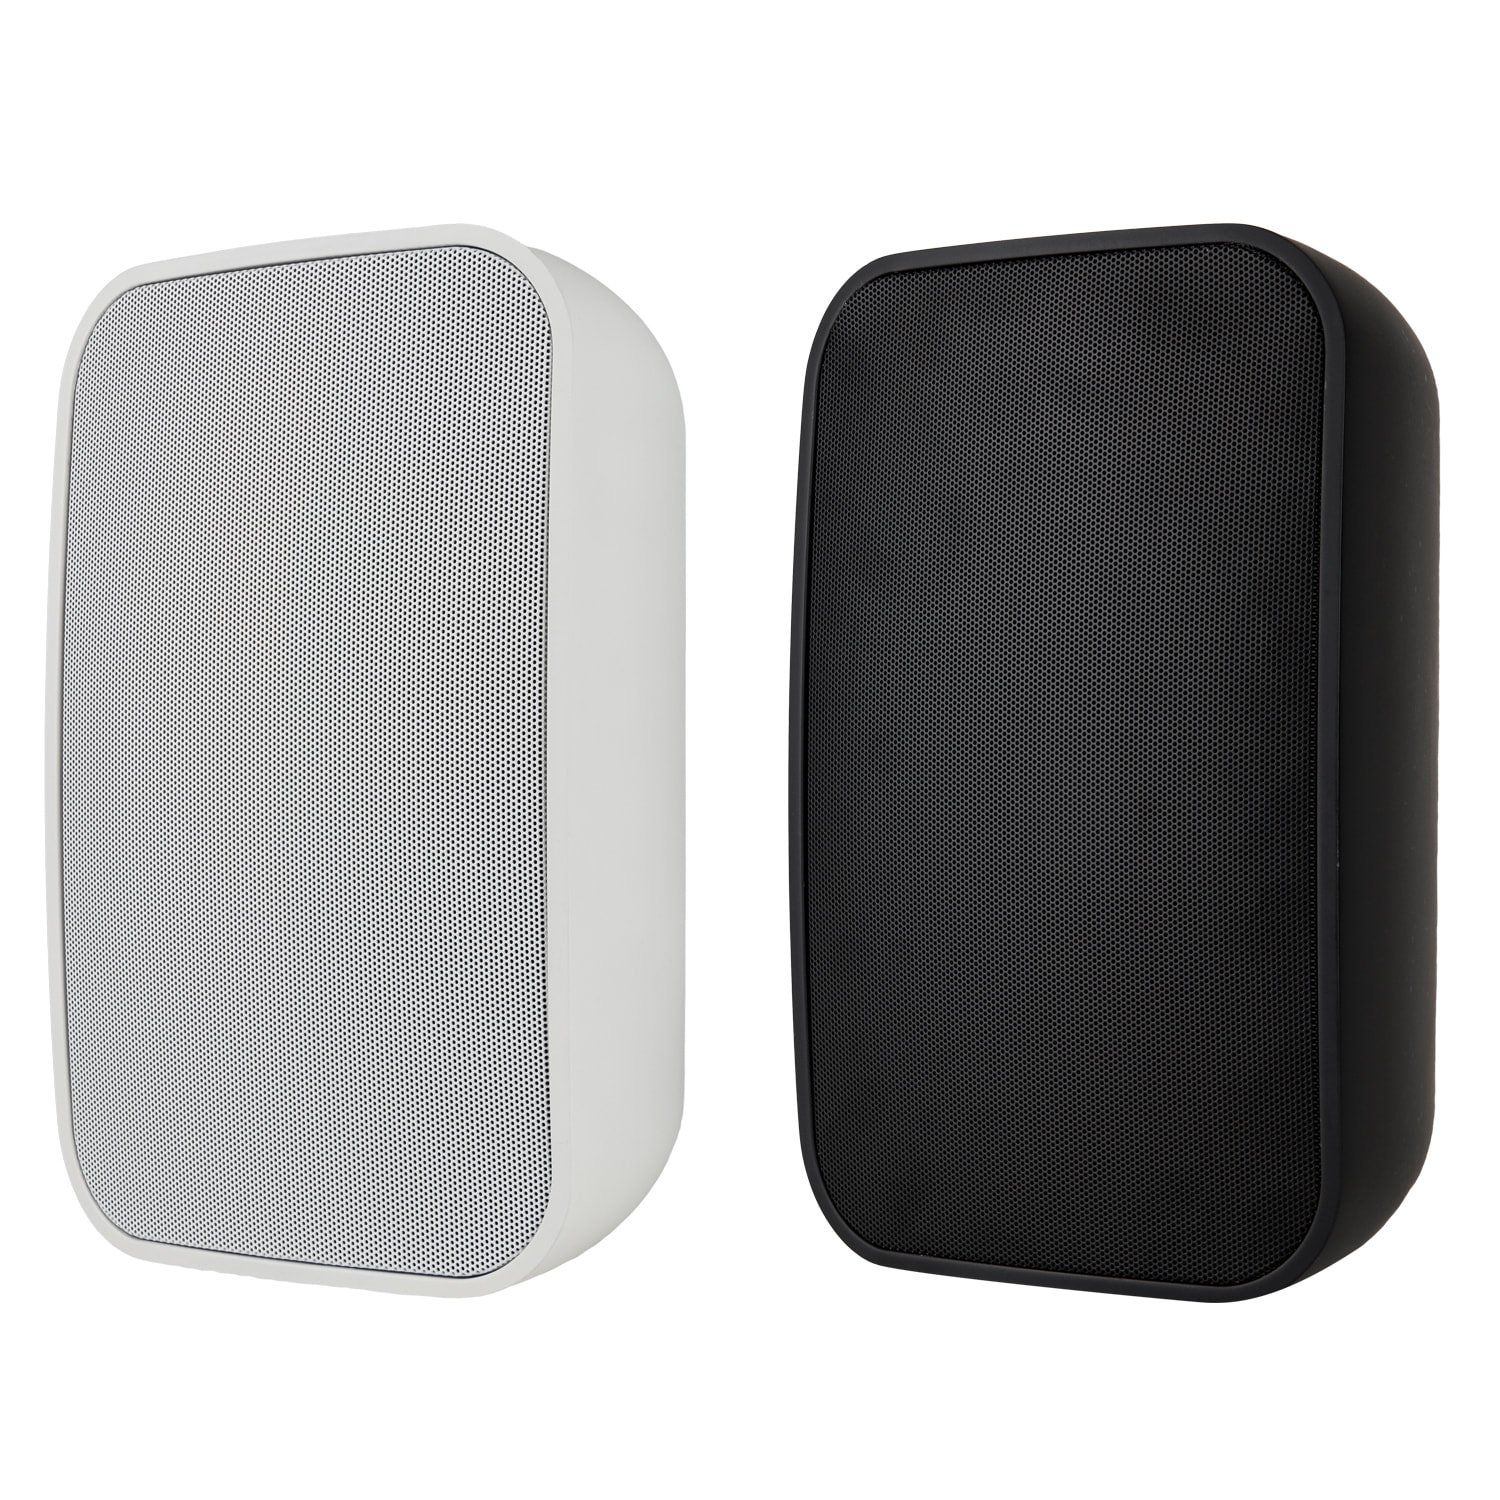 a white and black outdoor speaker for outdoor audio